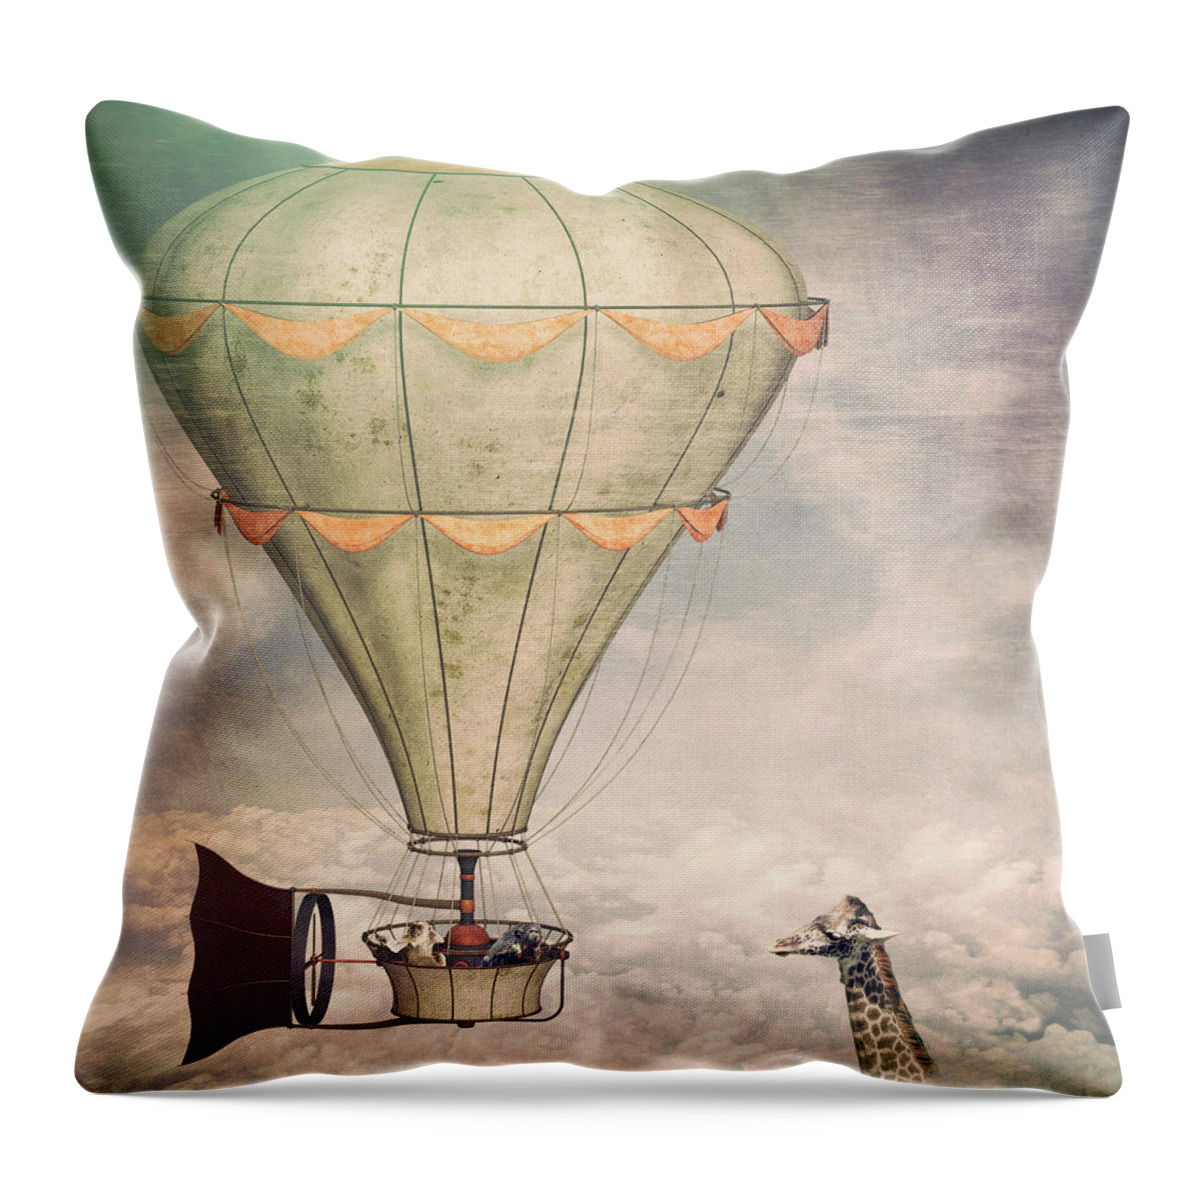 Monkeys Throw Pillow featuring the photograph Flying Monkeys by Deborah Penland